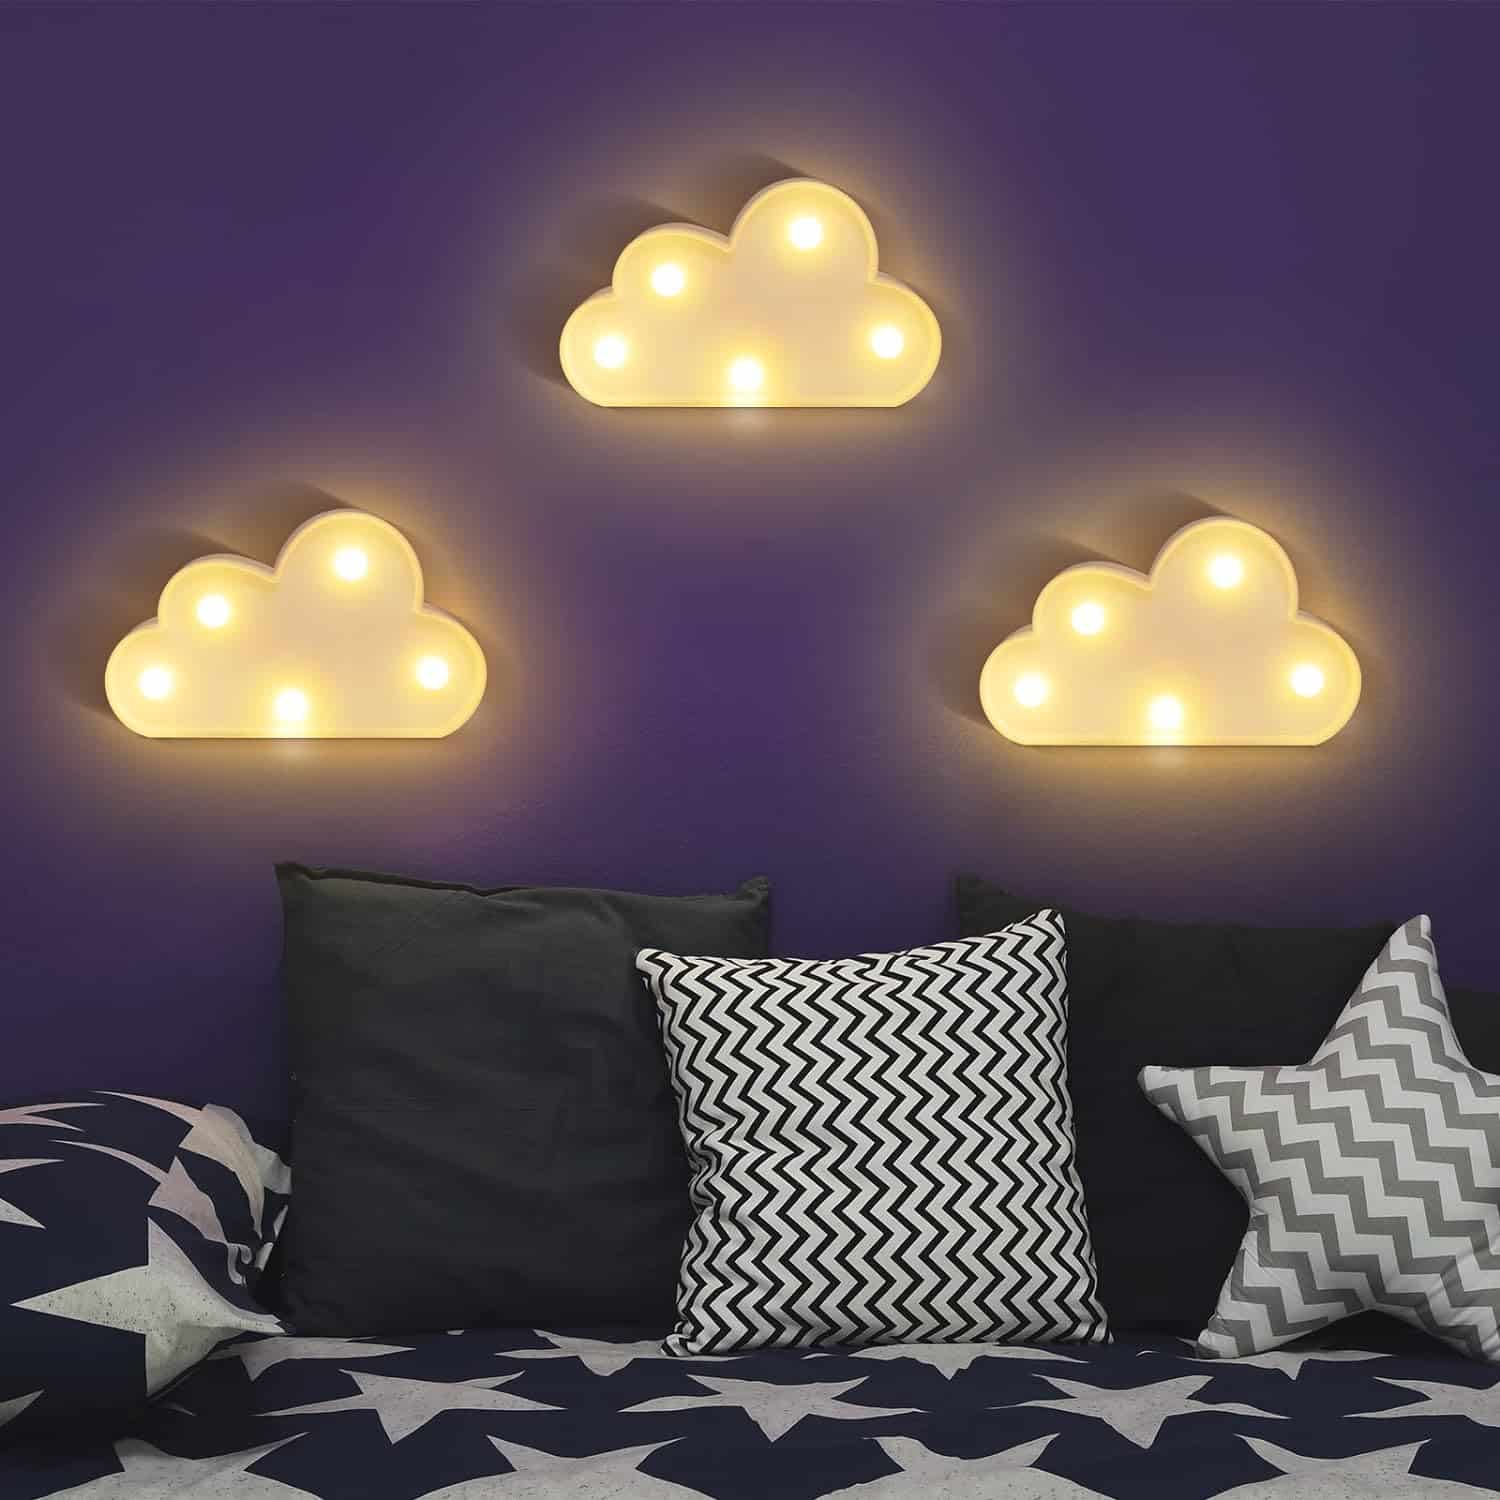 6 Pcs LED Cloud Night Light Can Be Hung On The Wall Kids Room Room Light, Suitable for Birthday Party Holiday Decoration Baby Room Nursery Decoration (Clound-6pcs)